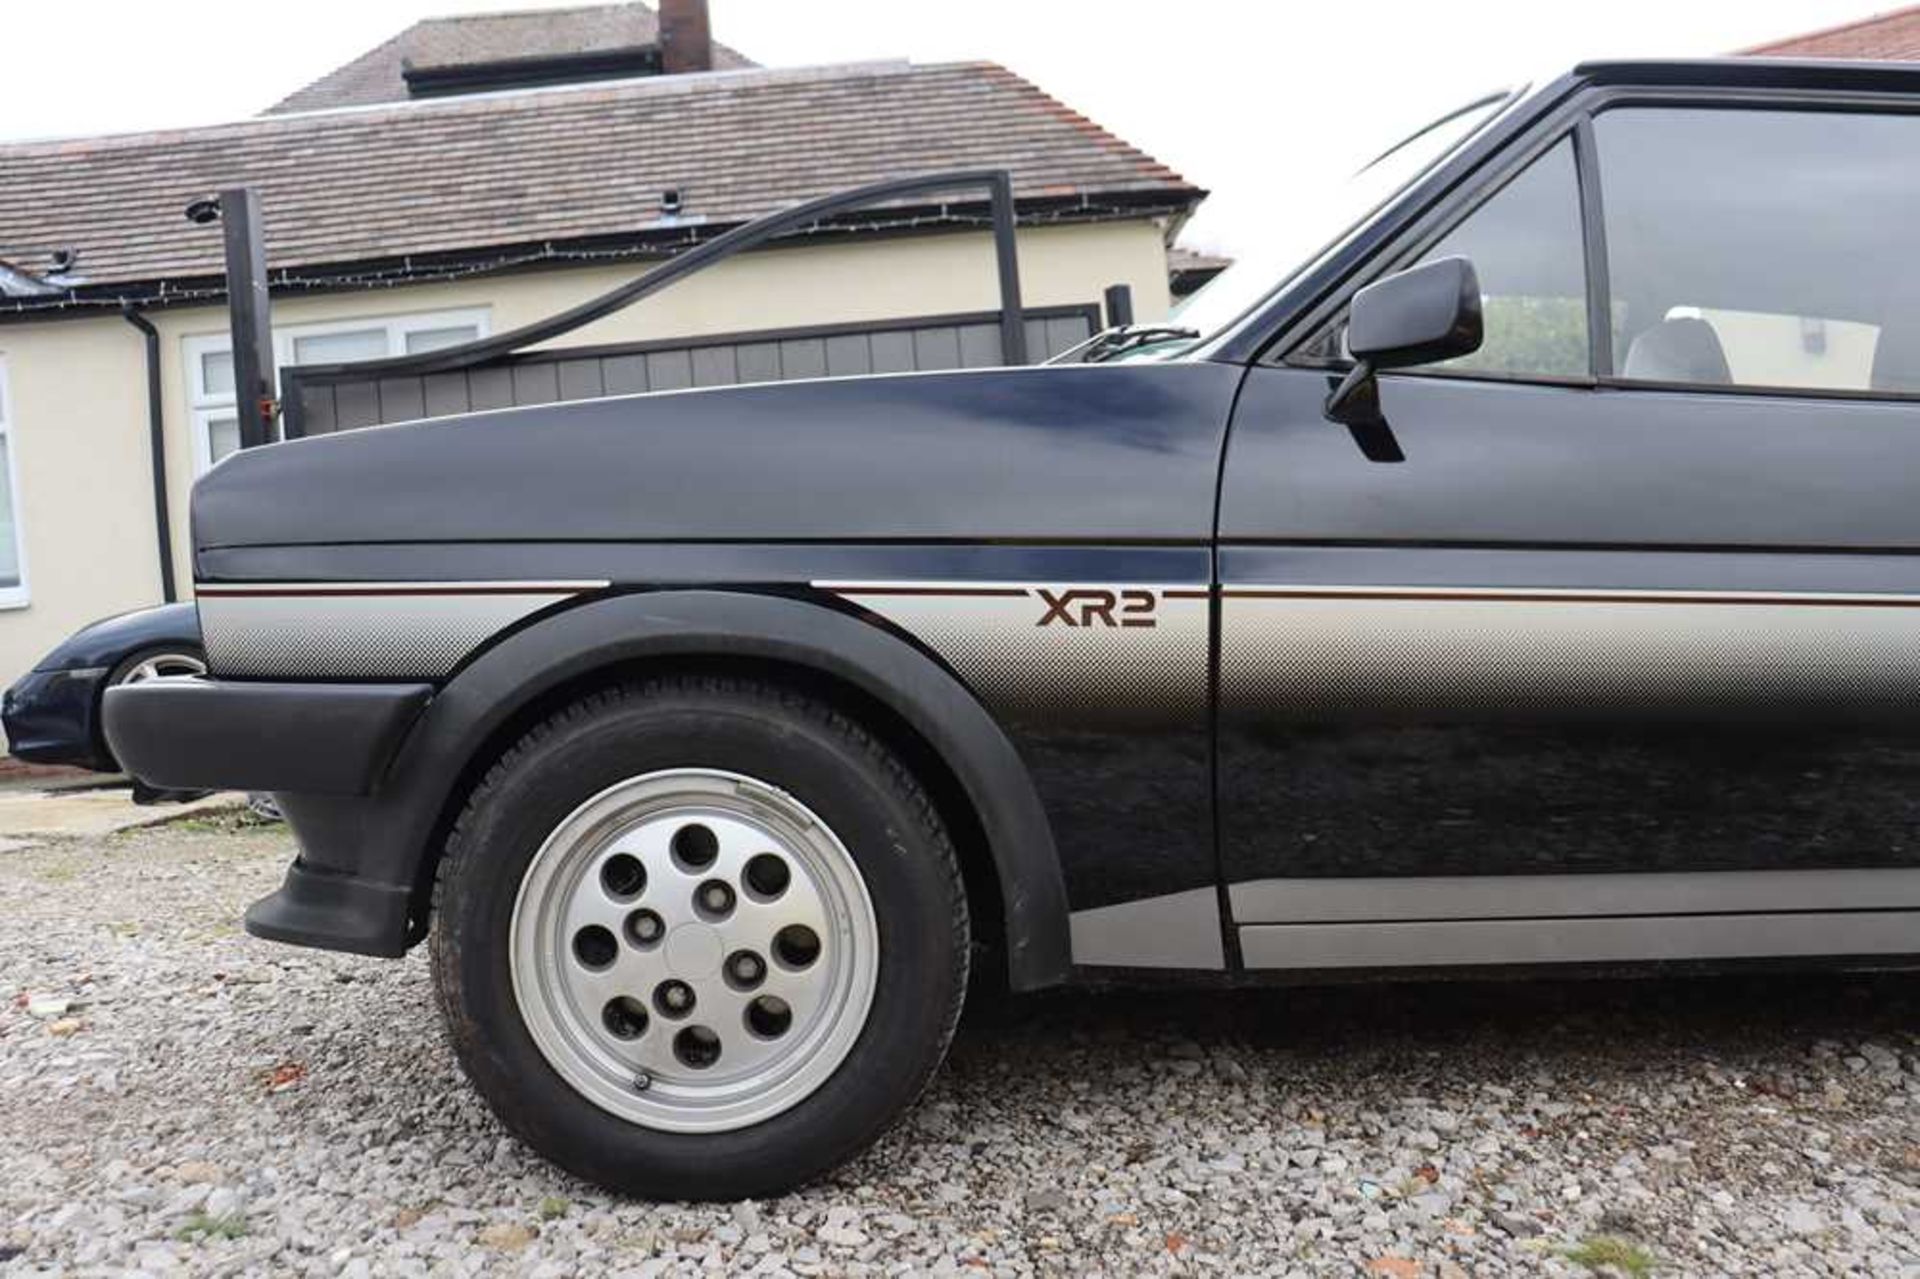 1983 Ford Fiesta XR2 - Image 37 of 56